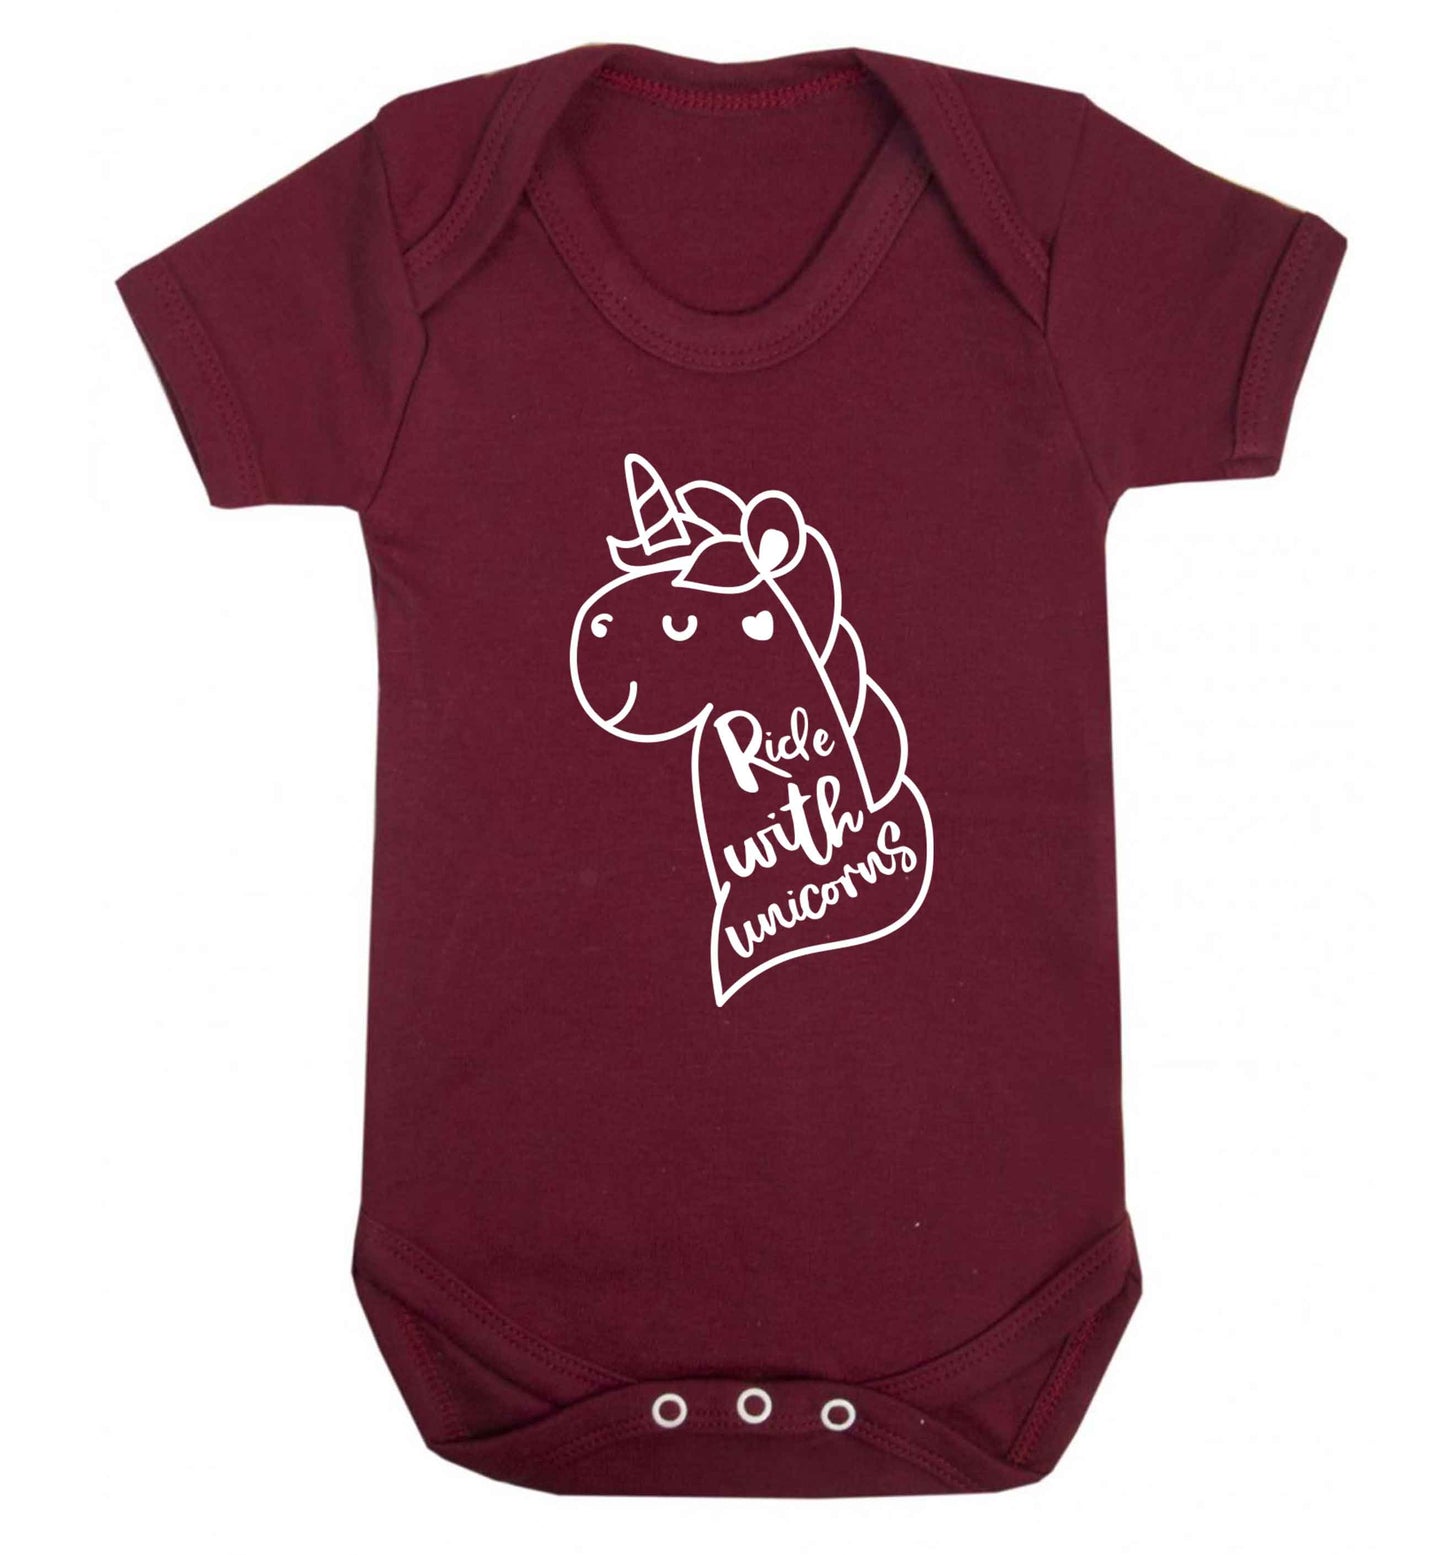 Ride with unicorns Baby Vest maroon 18-24 months